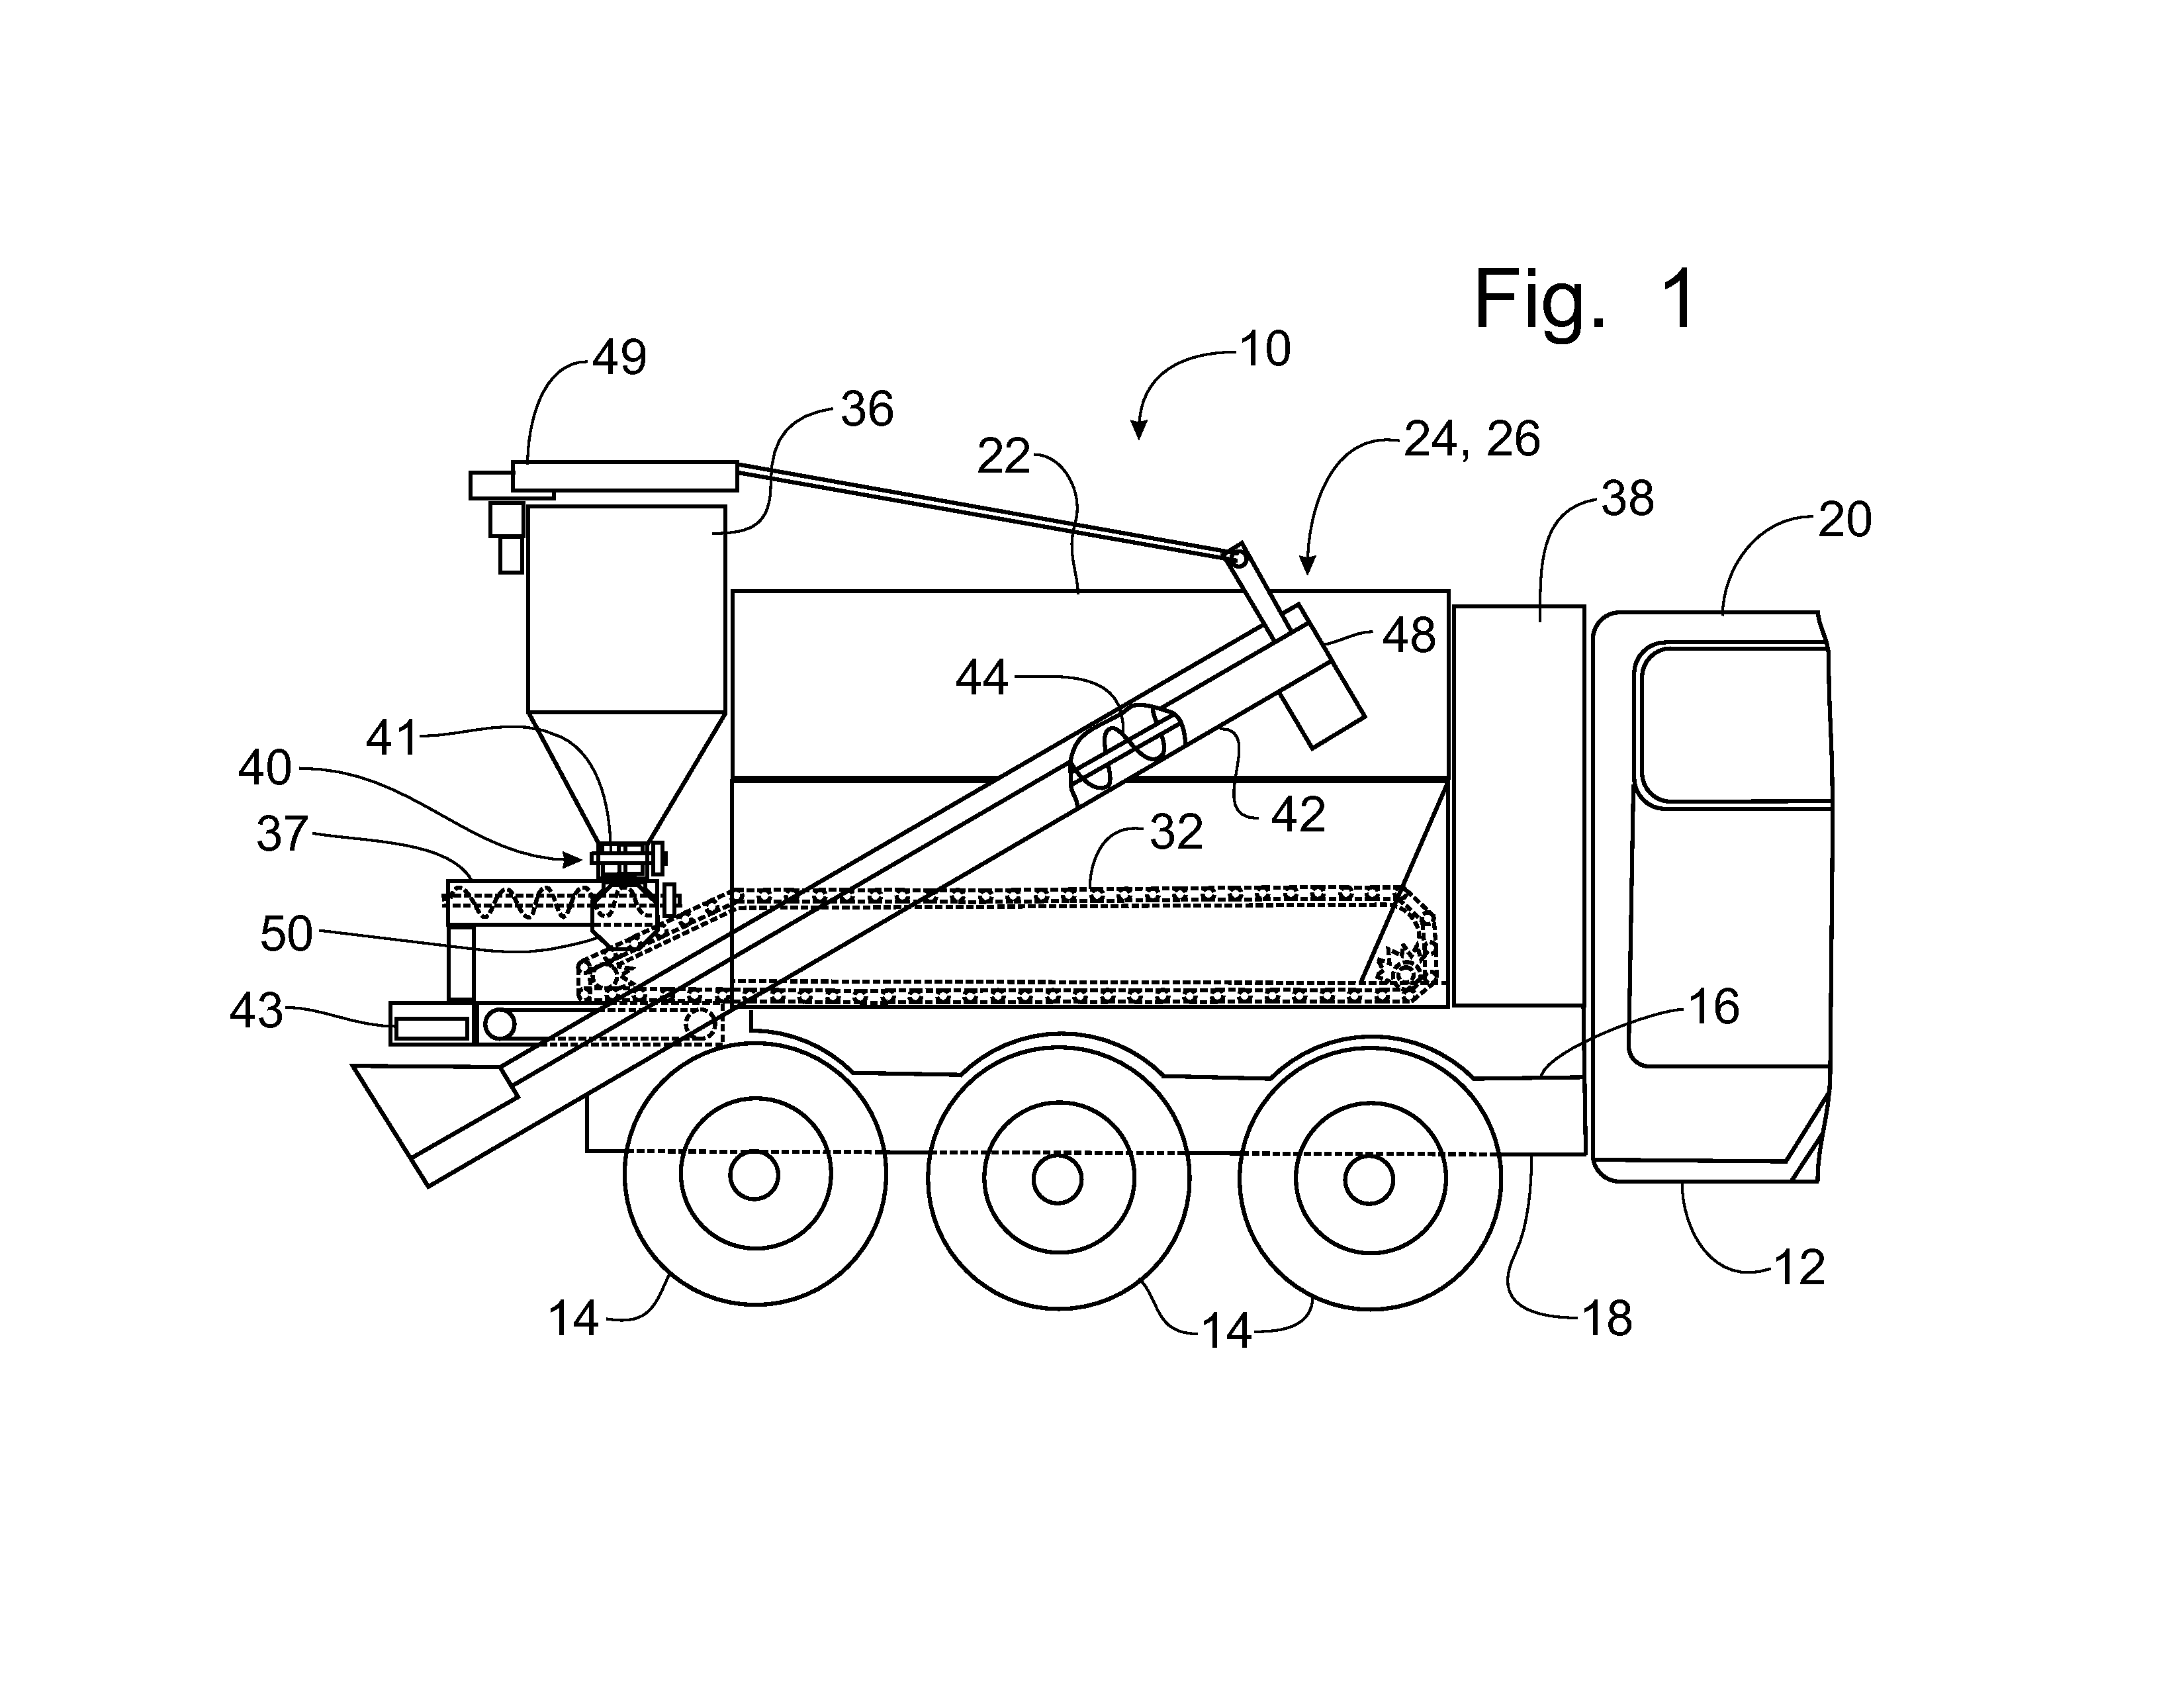 Method of mixing cement and water for concrete production